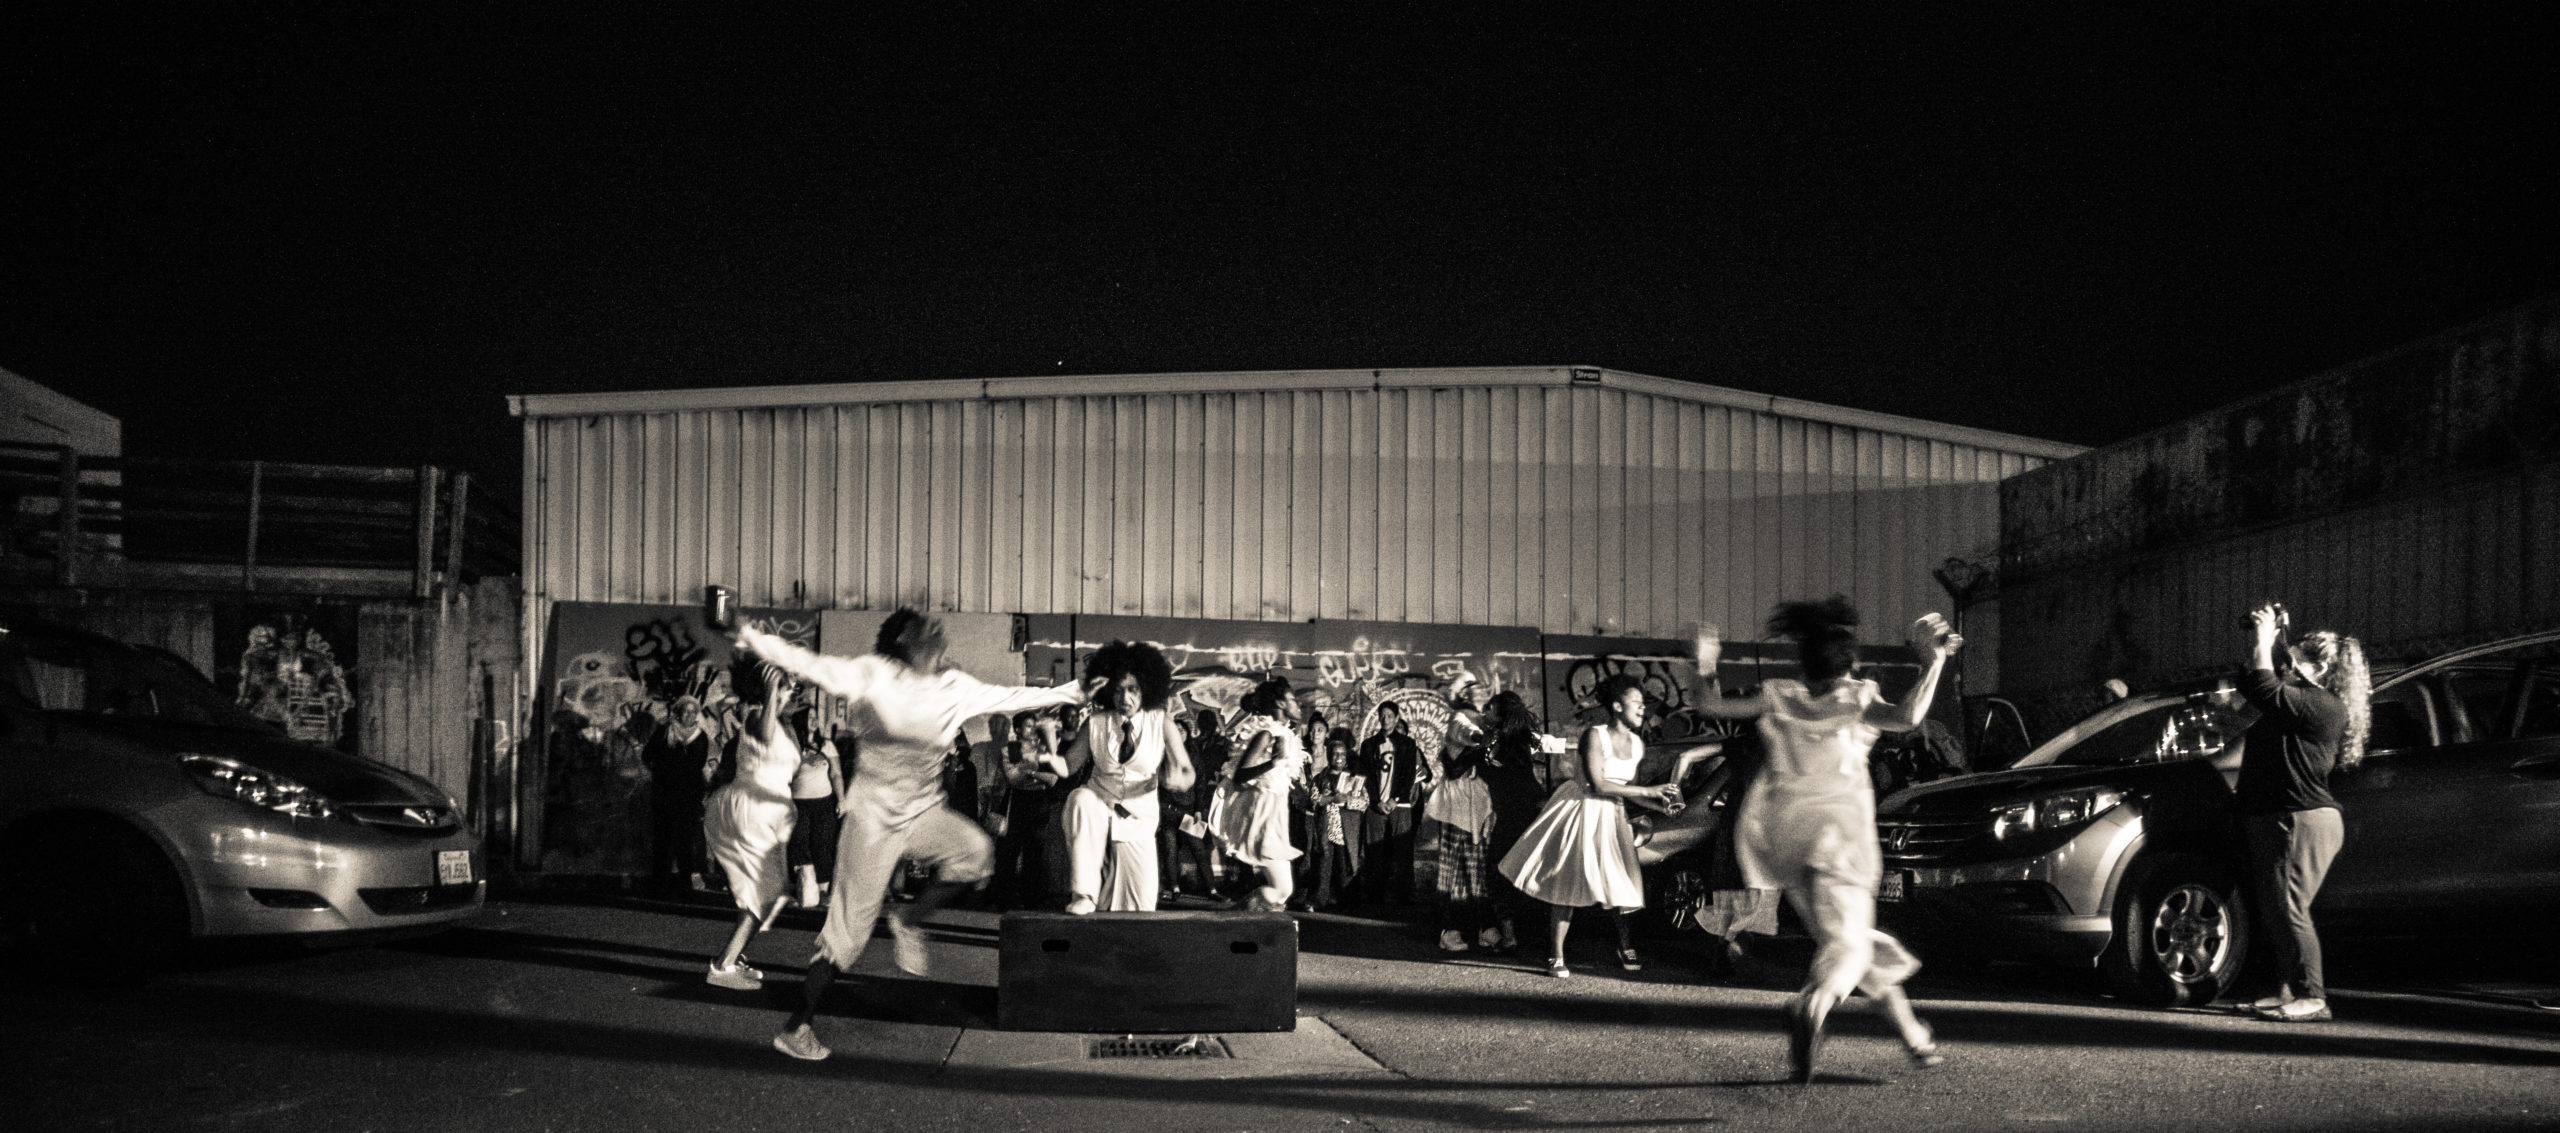 Performers dancing in a parking lot